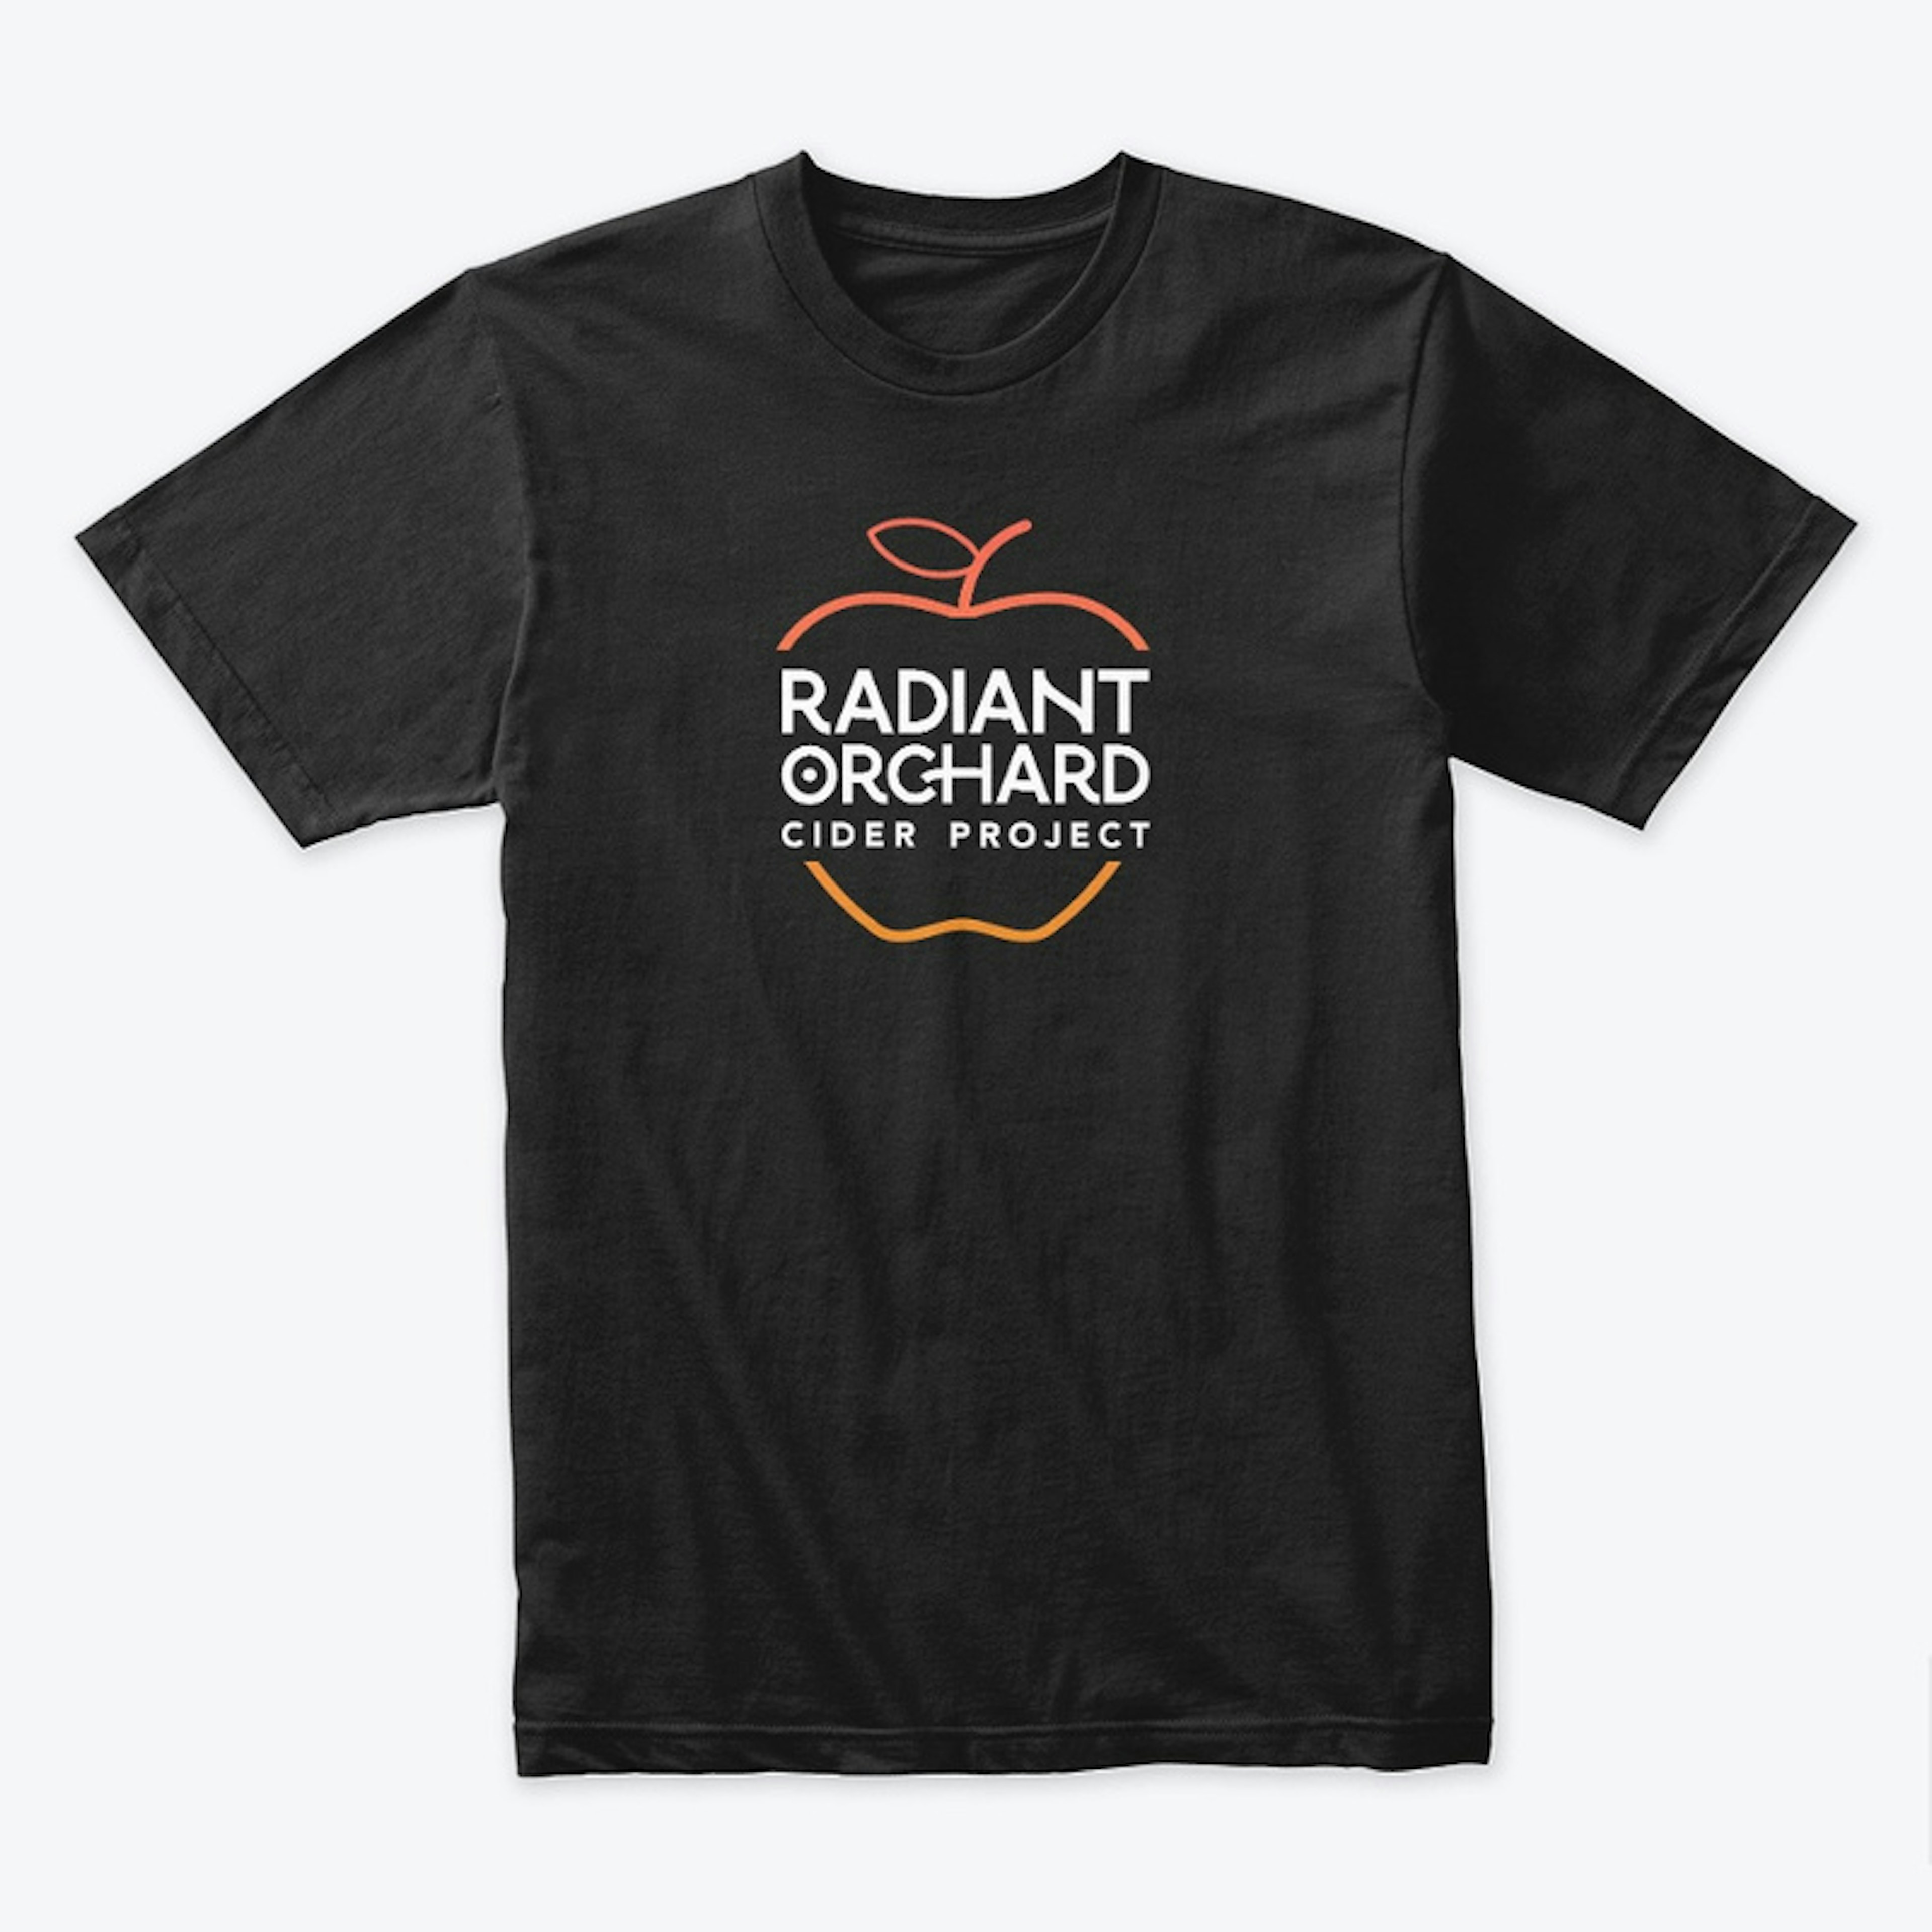 Radiant Orchard Cider Project